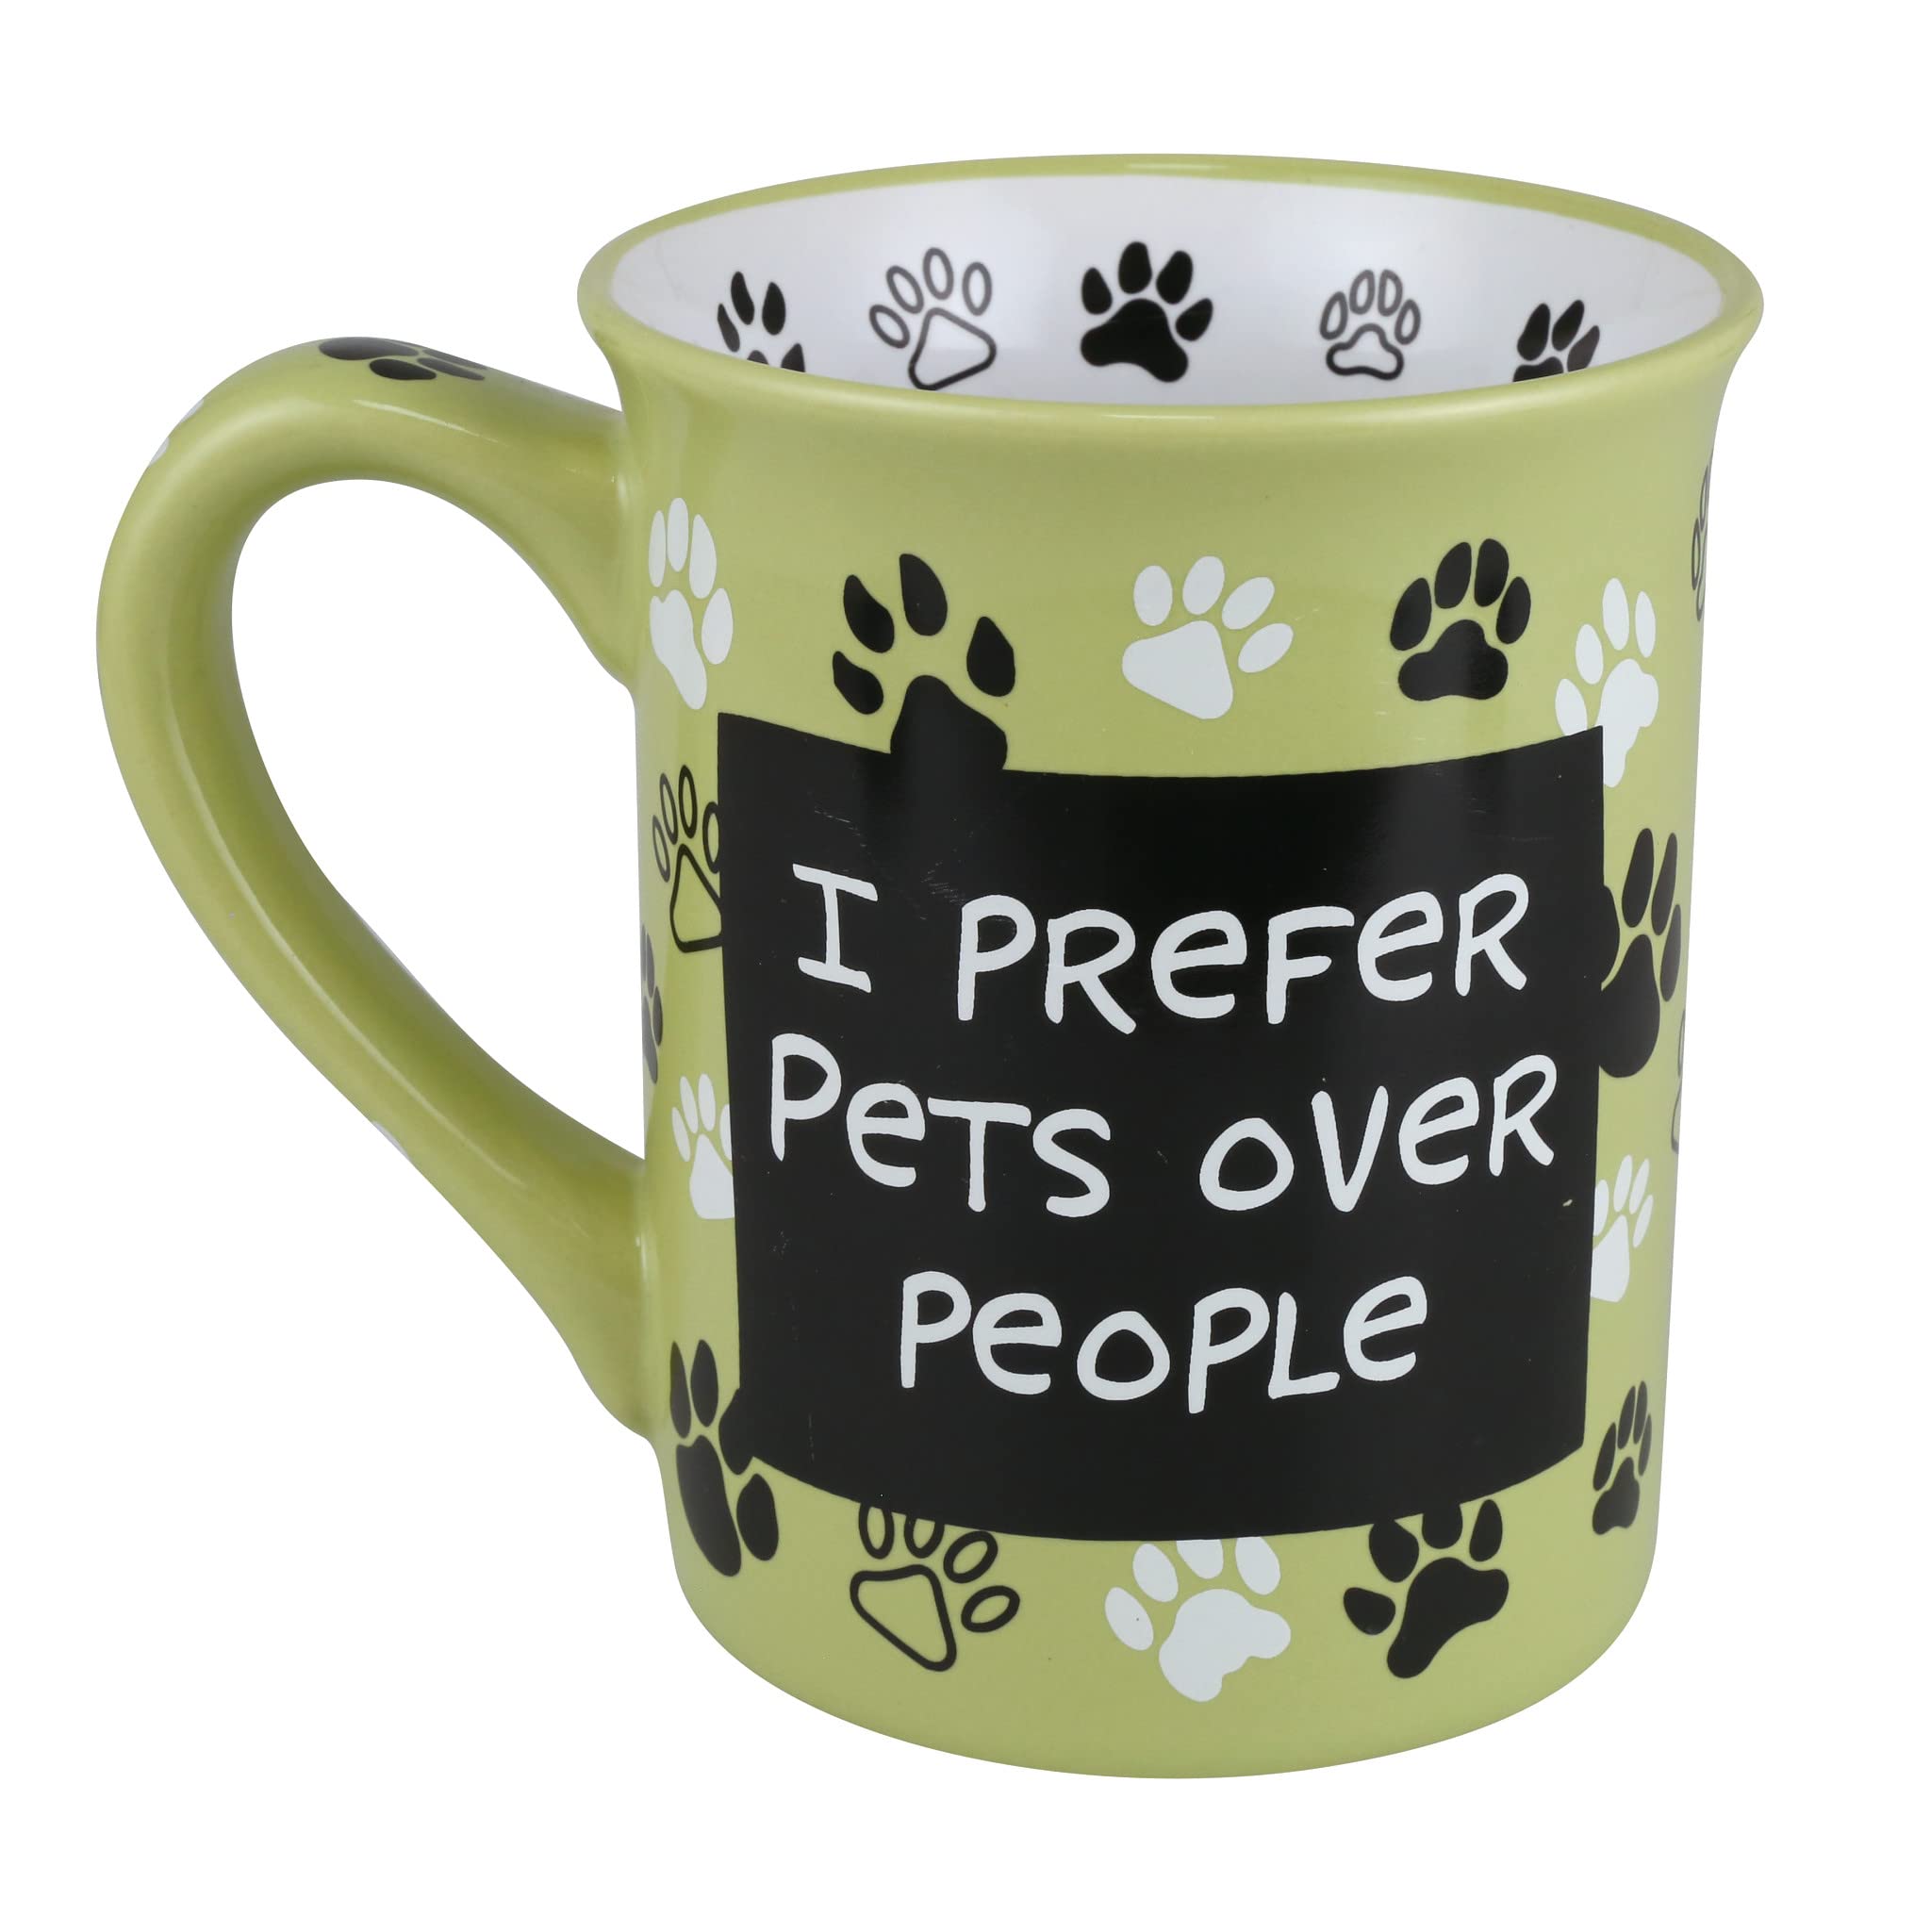 Enesco Our Name is Mud Leader of The Pack Pets Over People Coffee Mug, 16 Ounce, Multicolor